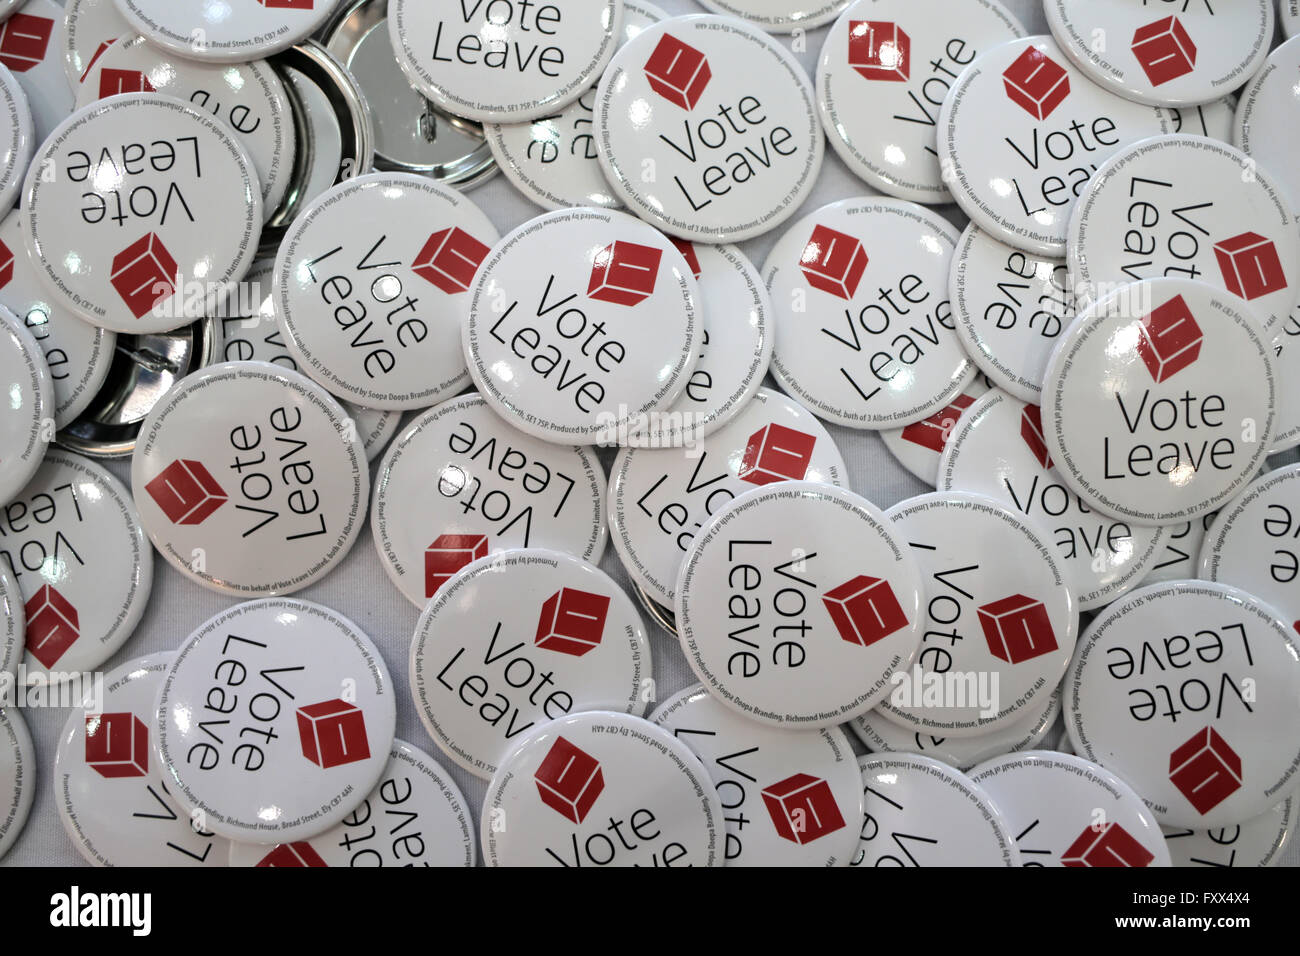 Newcastle Upon Tyne, TYNE AND WEAR/UK - APRIL 16th 2016 - Vote Leave badges at a speech by Mayor of London Boris Johnson. Stock Photo